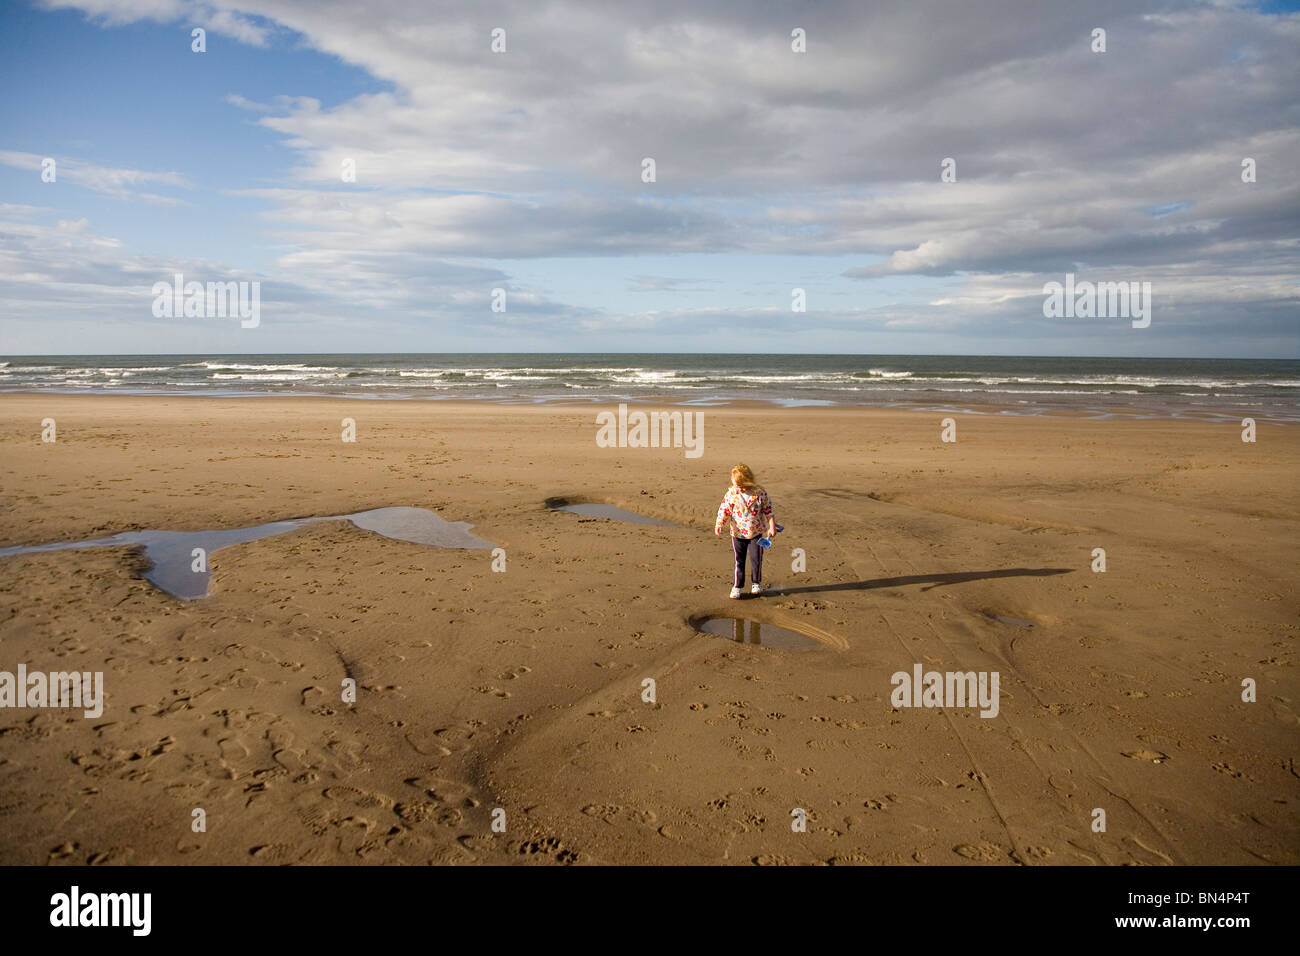 Young girl alone on a beach Stock Photo